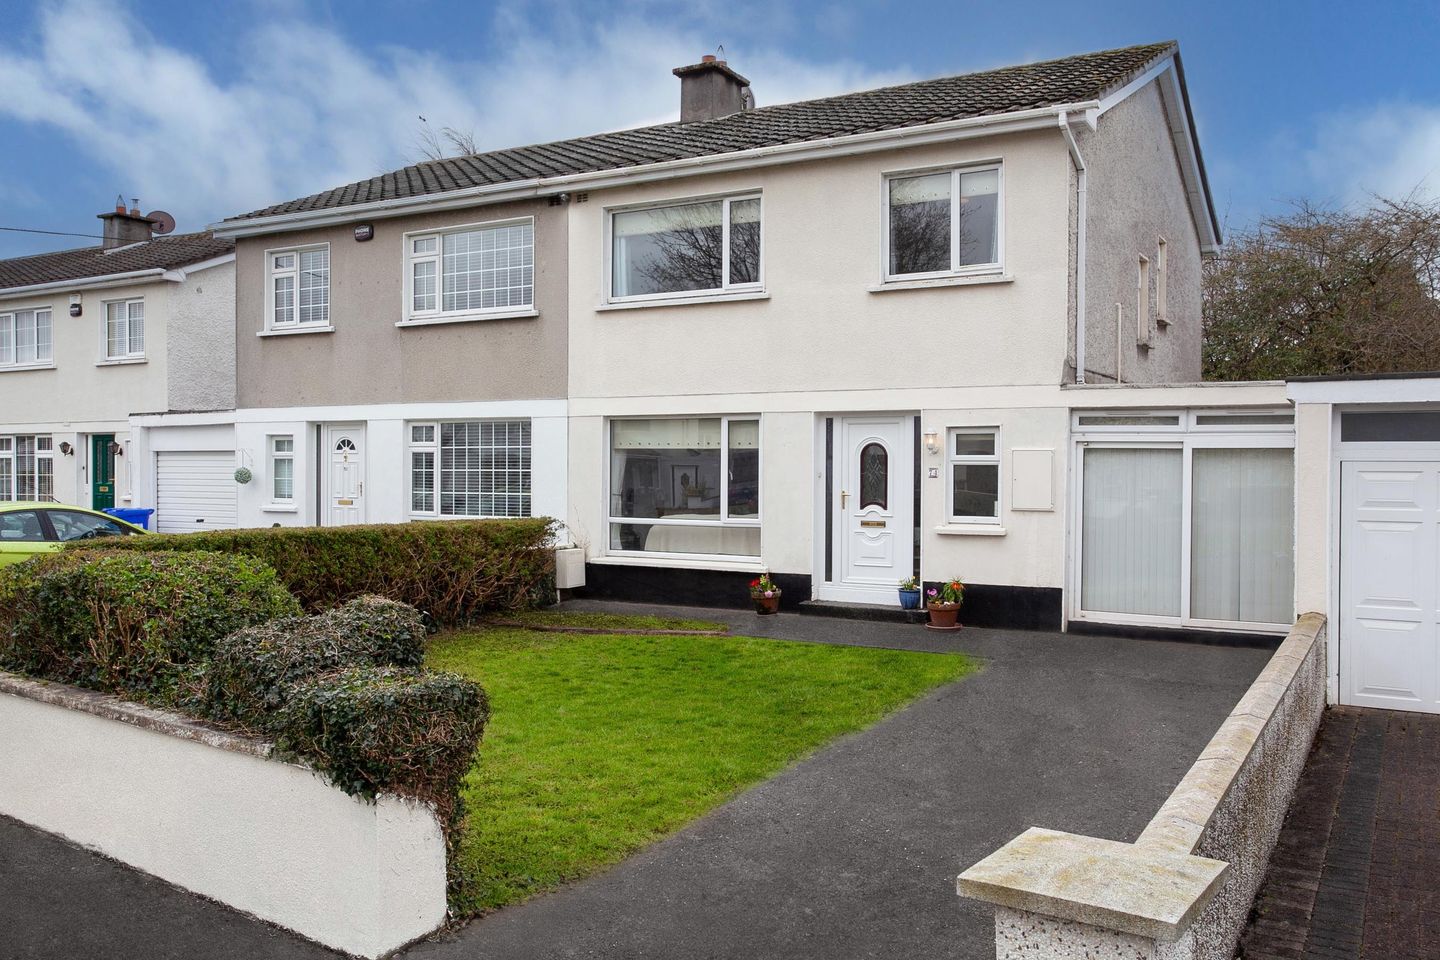 74 Maynooth Park, Maynooth, Co. Kildare, W23A4A0